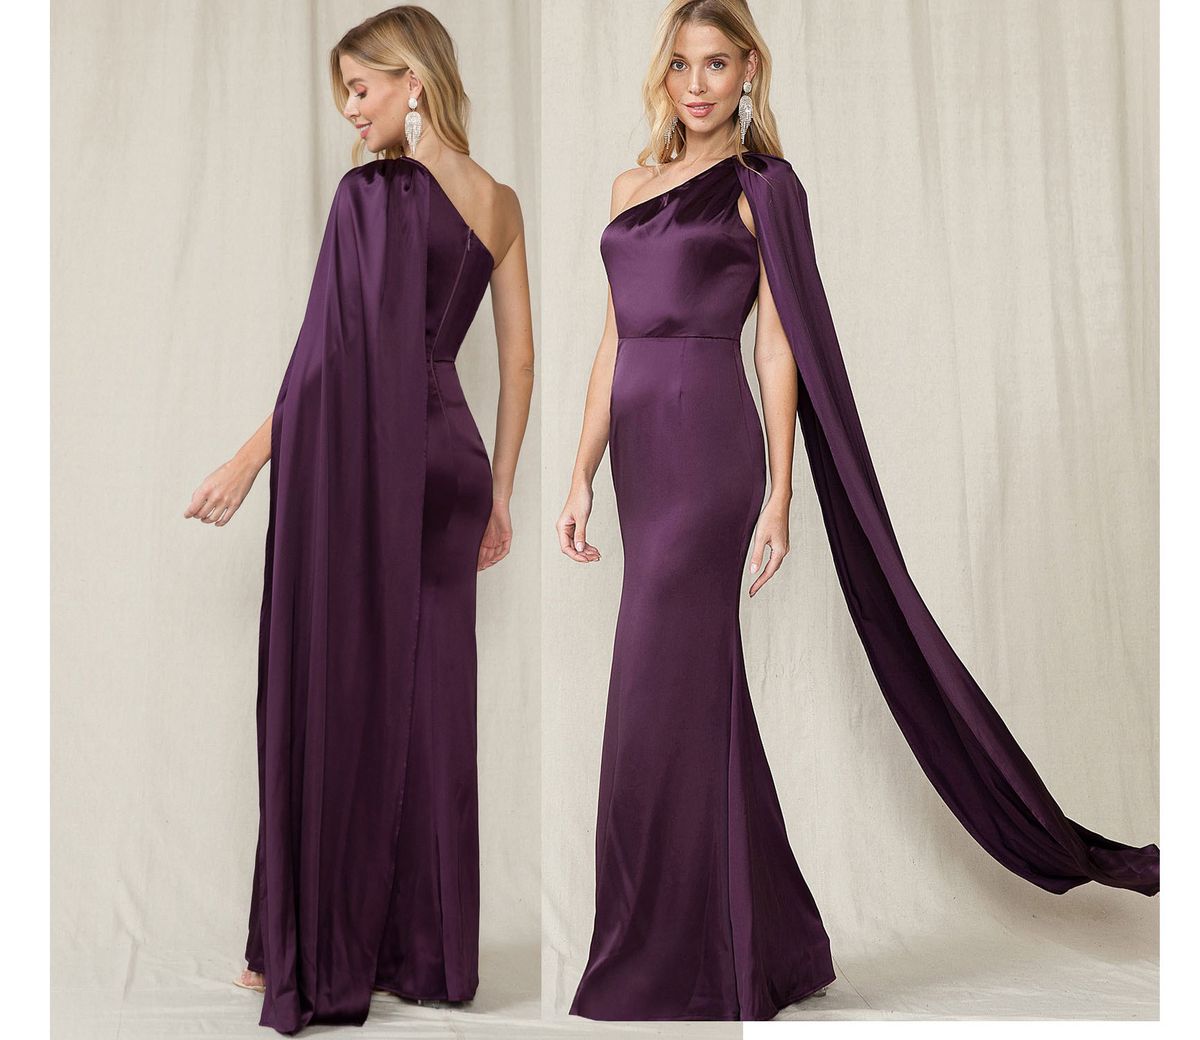 Style Eggplant Purple Grecian One Shoulder Cape Satin Gown Maniju Size 4 Prom One Shoulder Purple Floor Length Maxi on Queenly